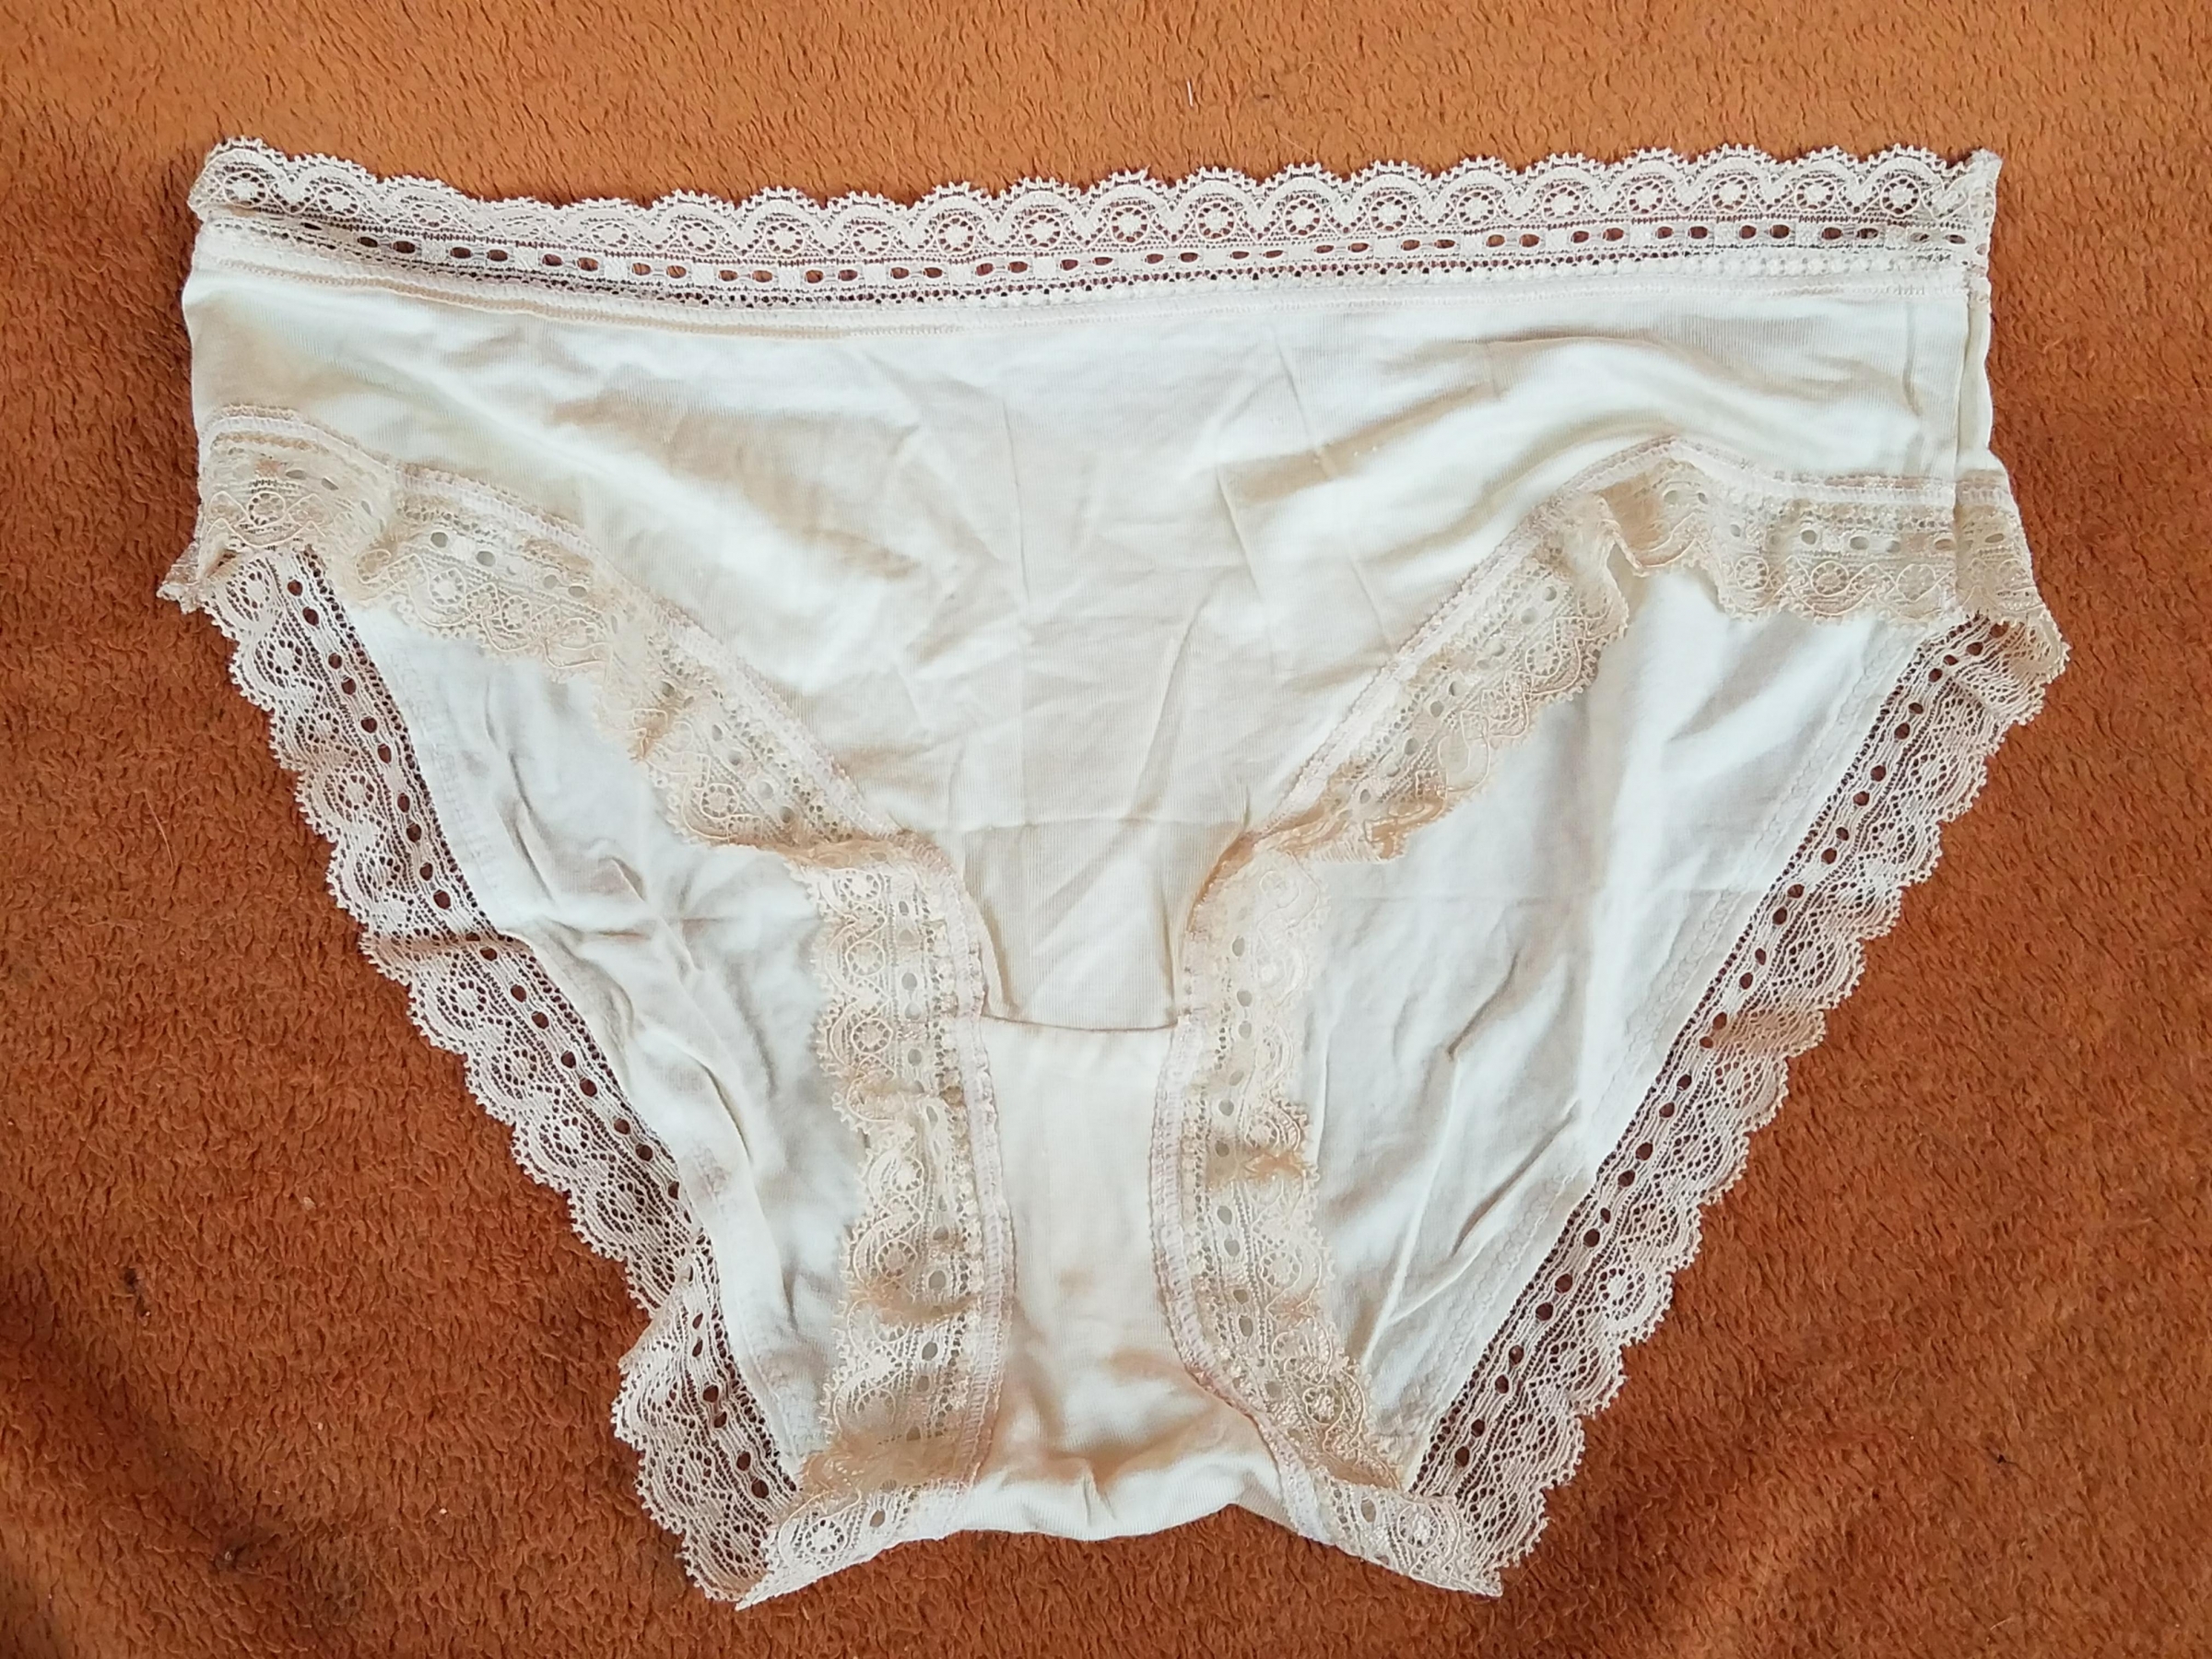 Sheer, sexy, and utterly adorable set of lace & cotton panties with vivid, vibrant colors & creative use of patterns, perfect EXCEPT size runs VERY small (an XL is like a Medium in US size).